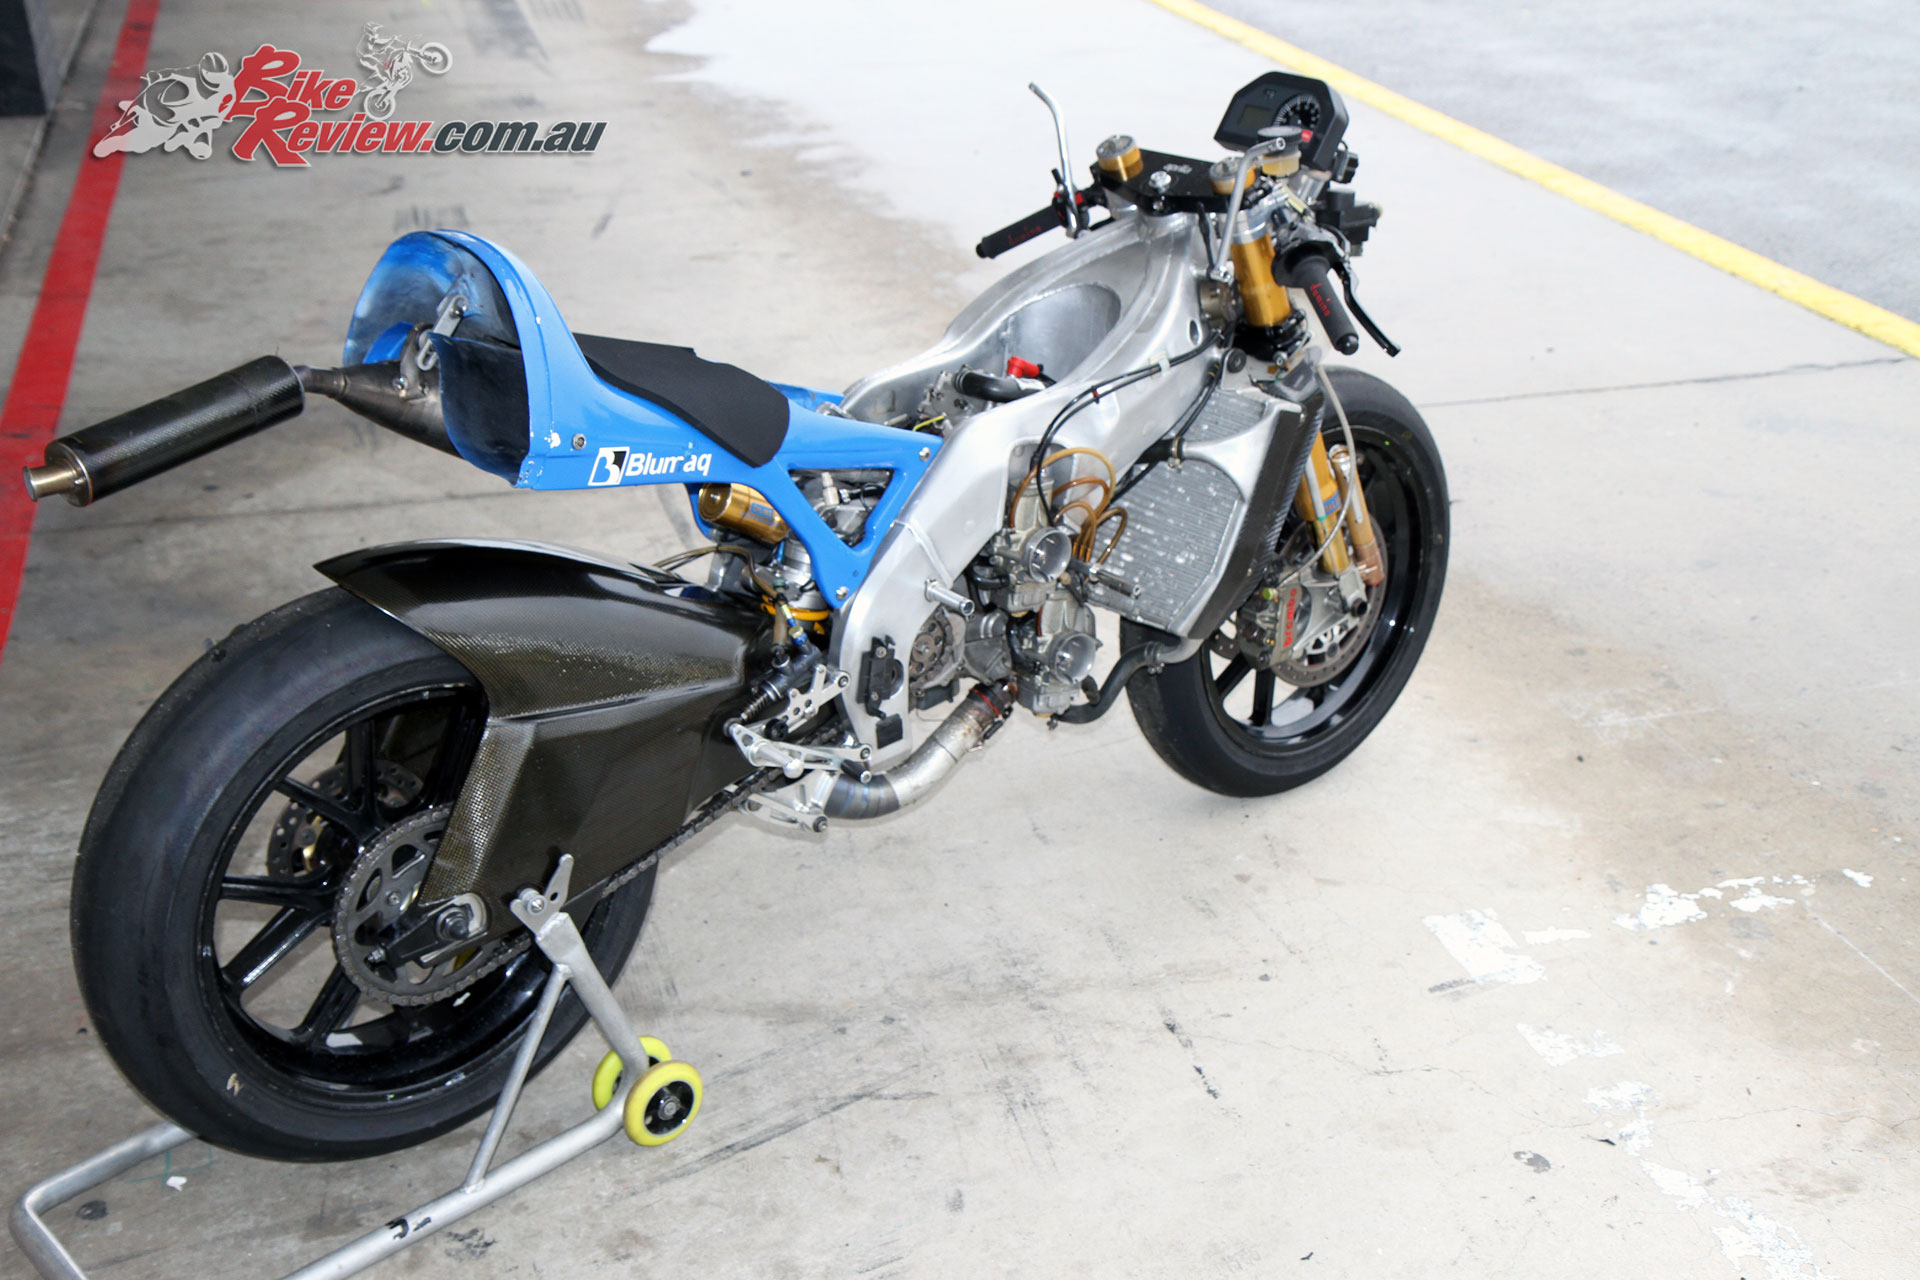 With the fairings stripped off you can see just how compact and light the RSW250 actually is.